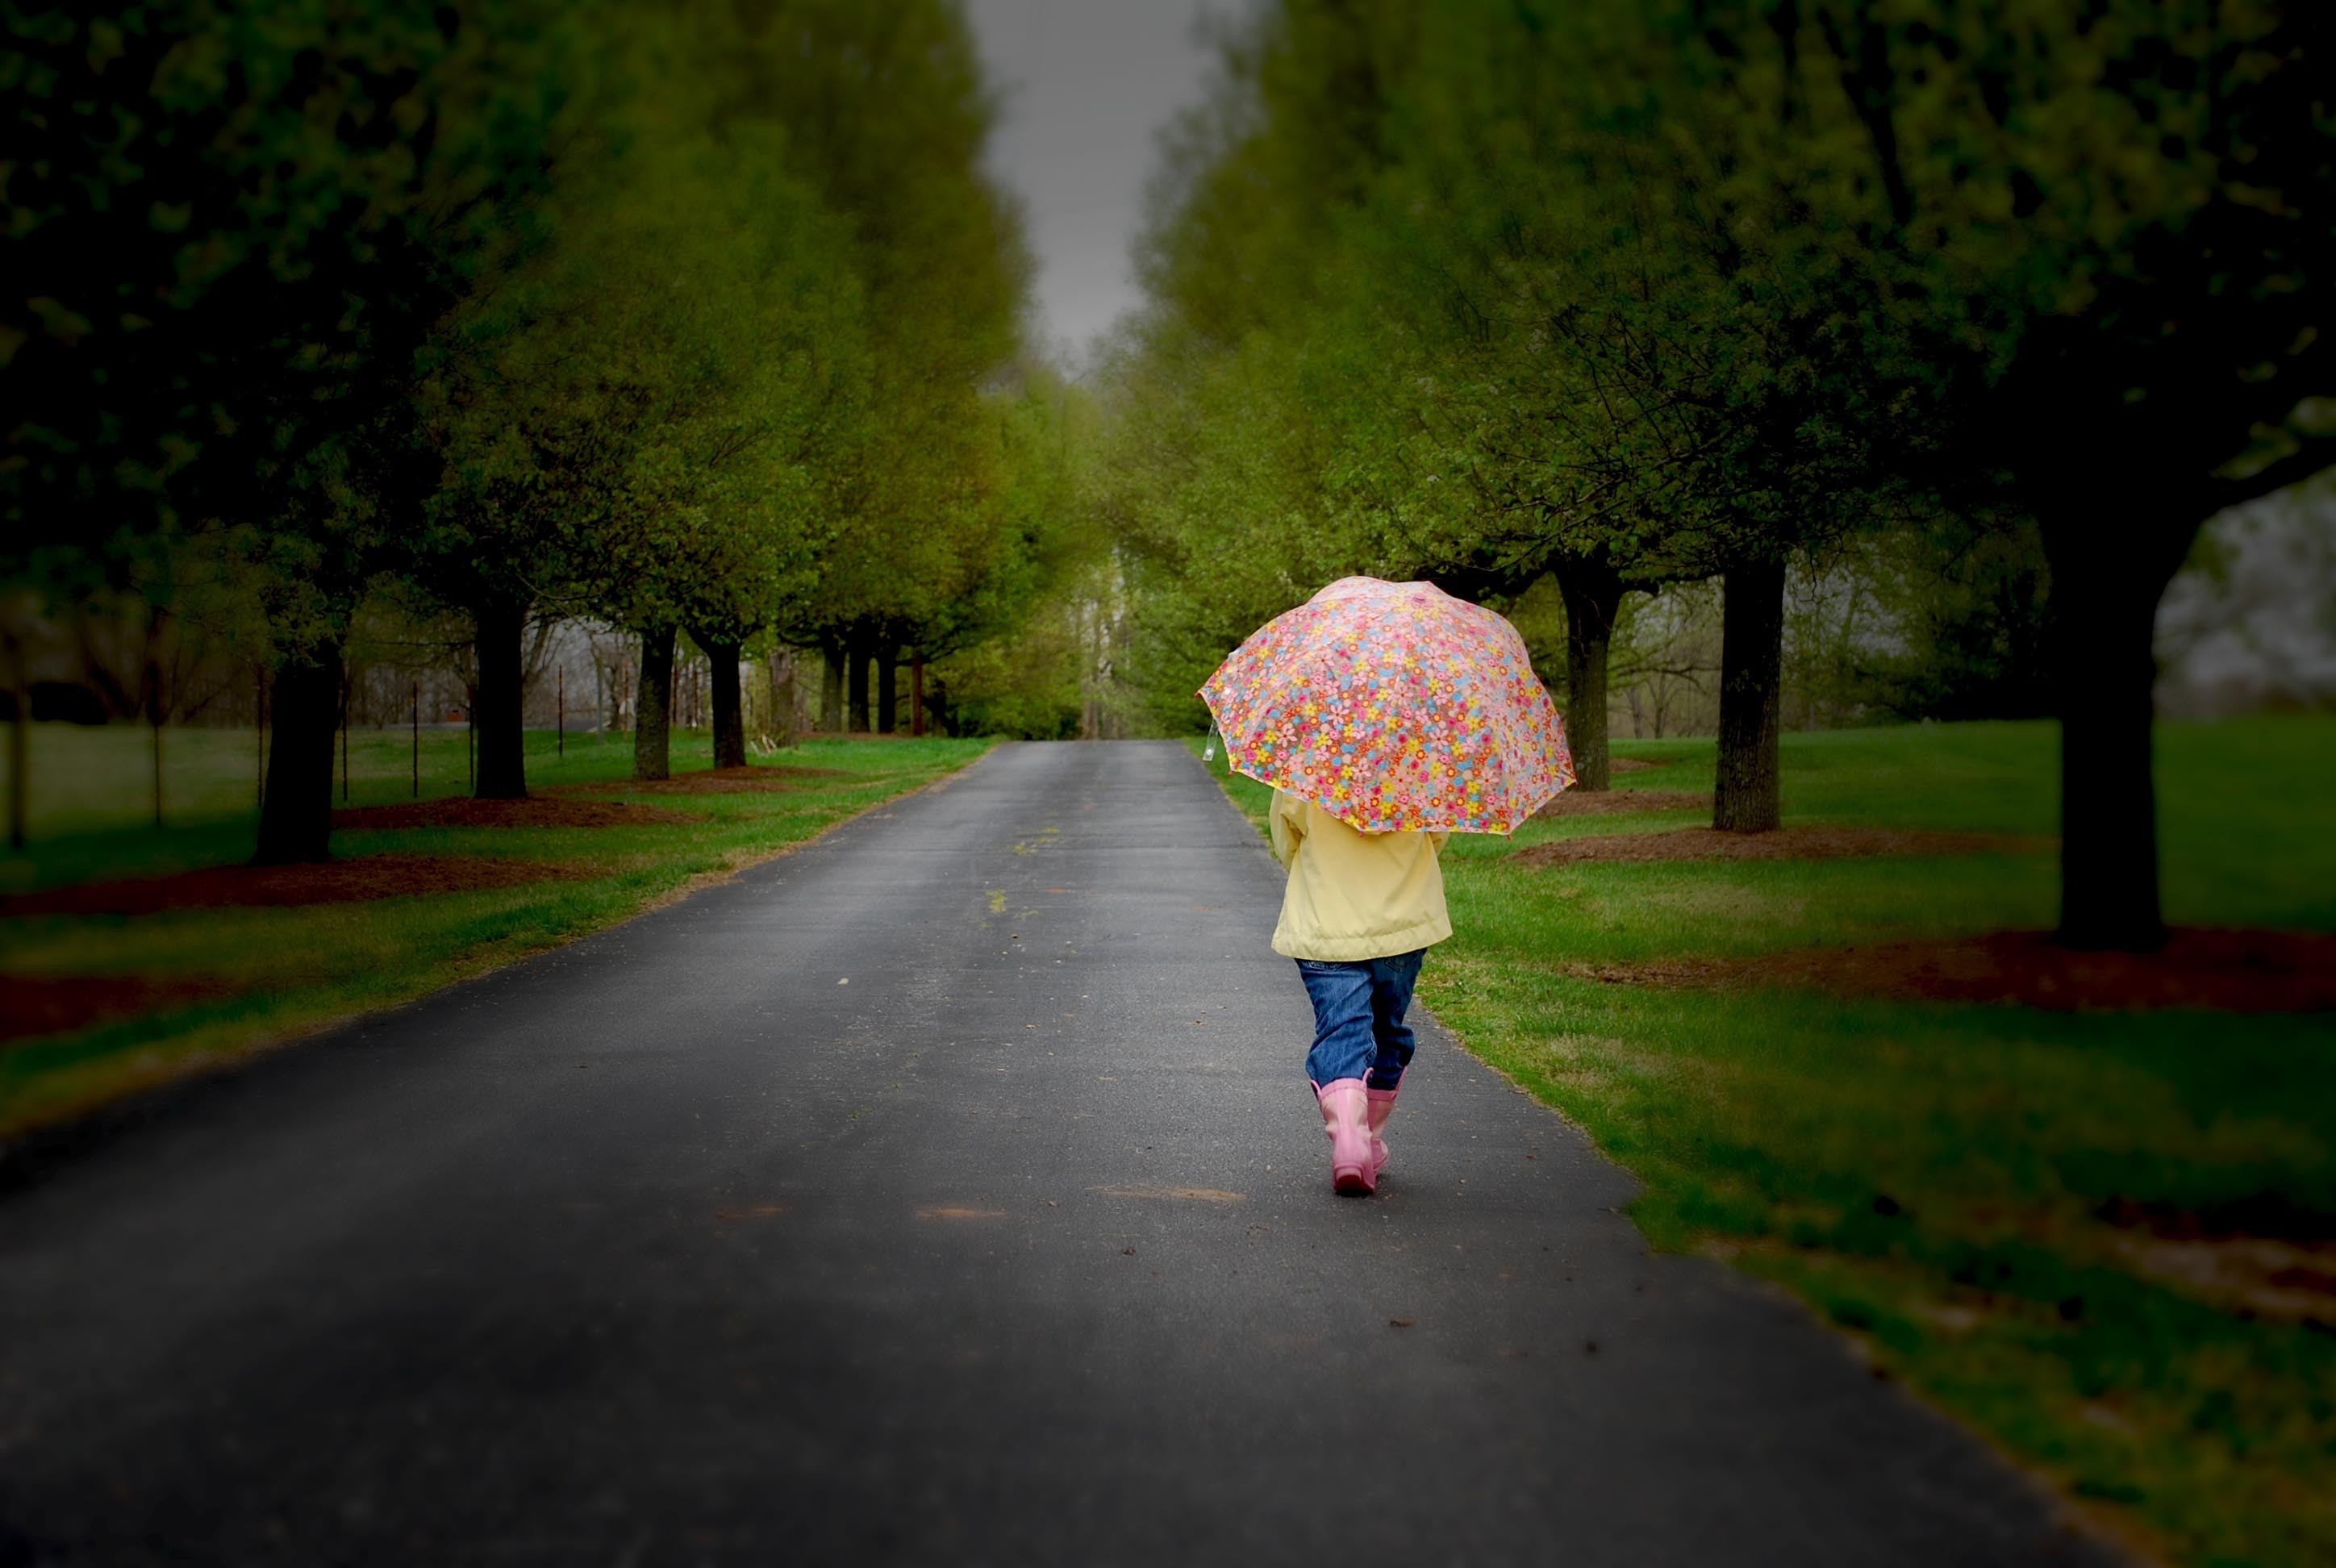 park, wood, miscellanea, miscellaneous, road, tree, stroll, overcast, mainly cloudy, umbrella cellphone